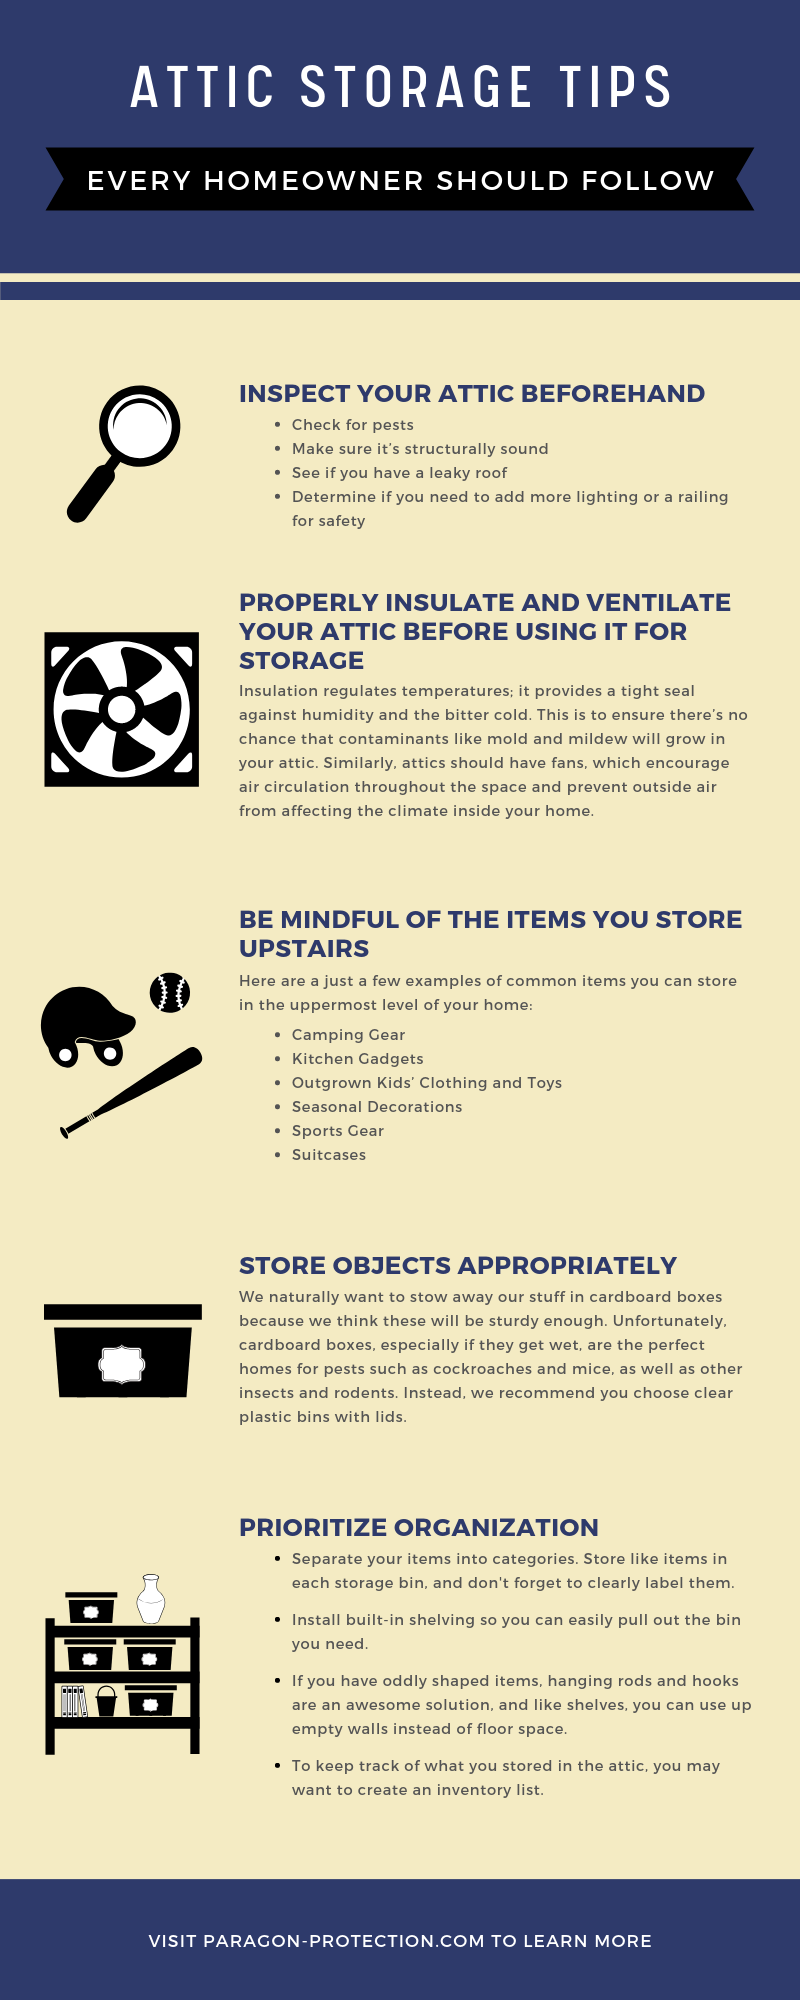 Attic Storage Tips Every Homeowner Should Follow infographic